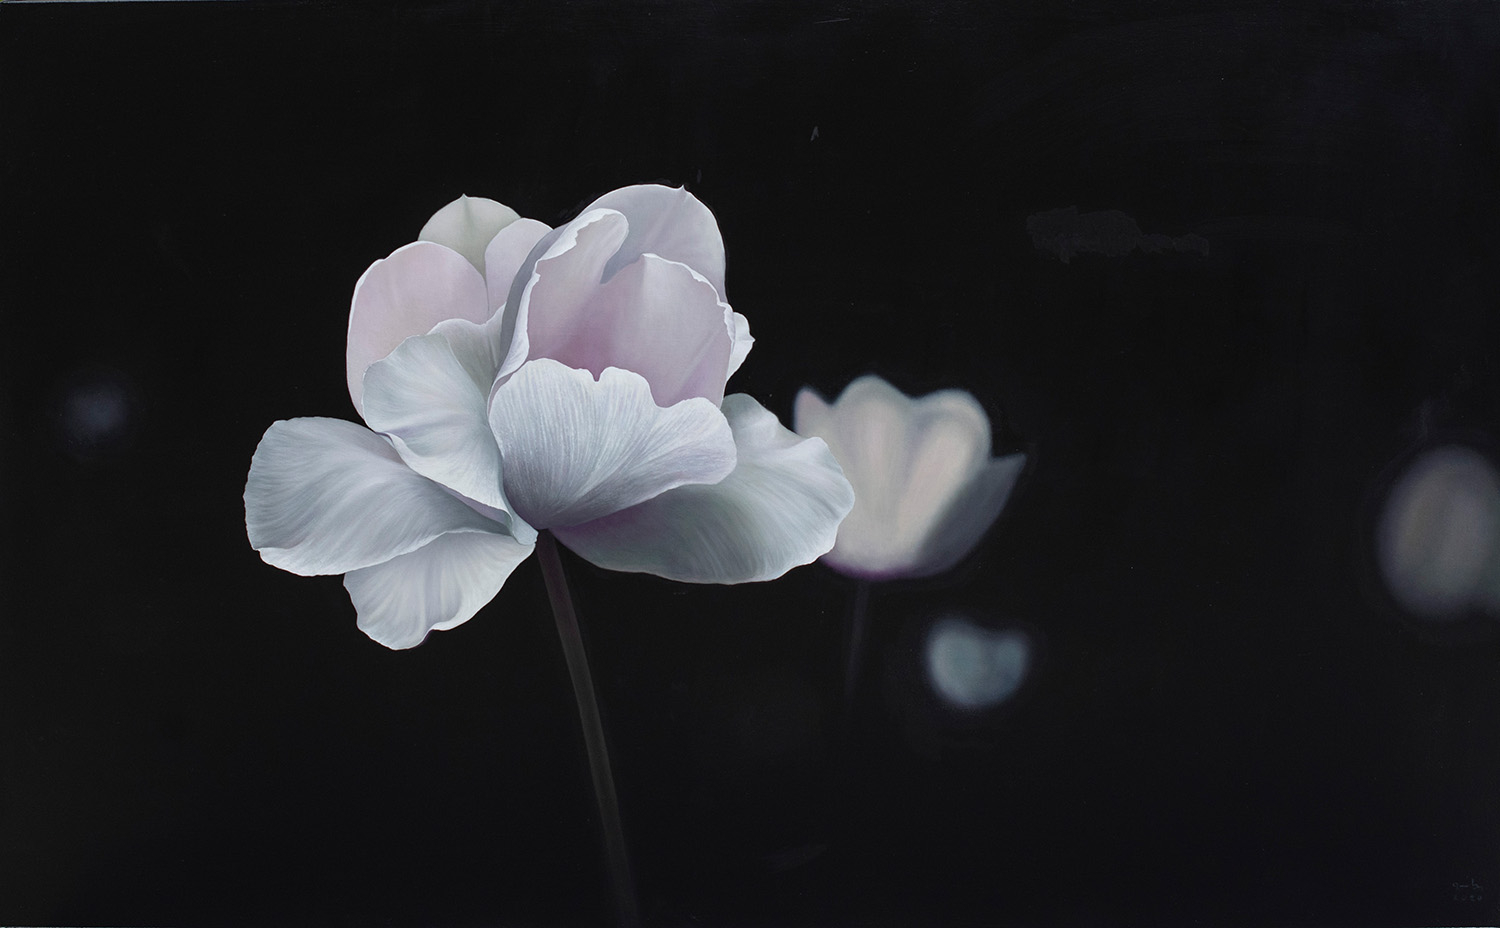 Why do I know that this is a white flower | Oil on canvas | 170 x 105 cm